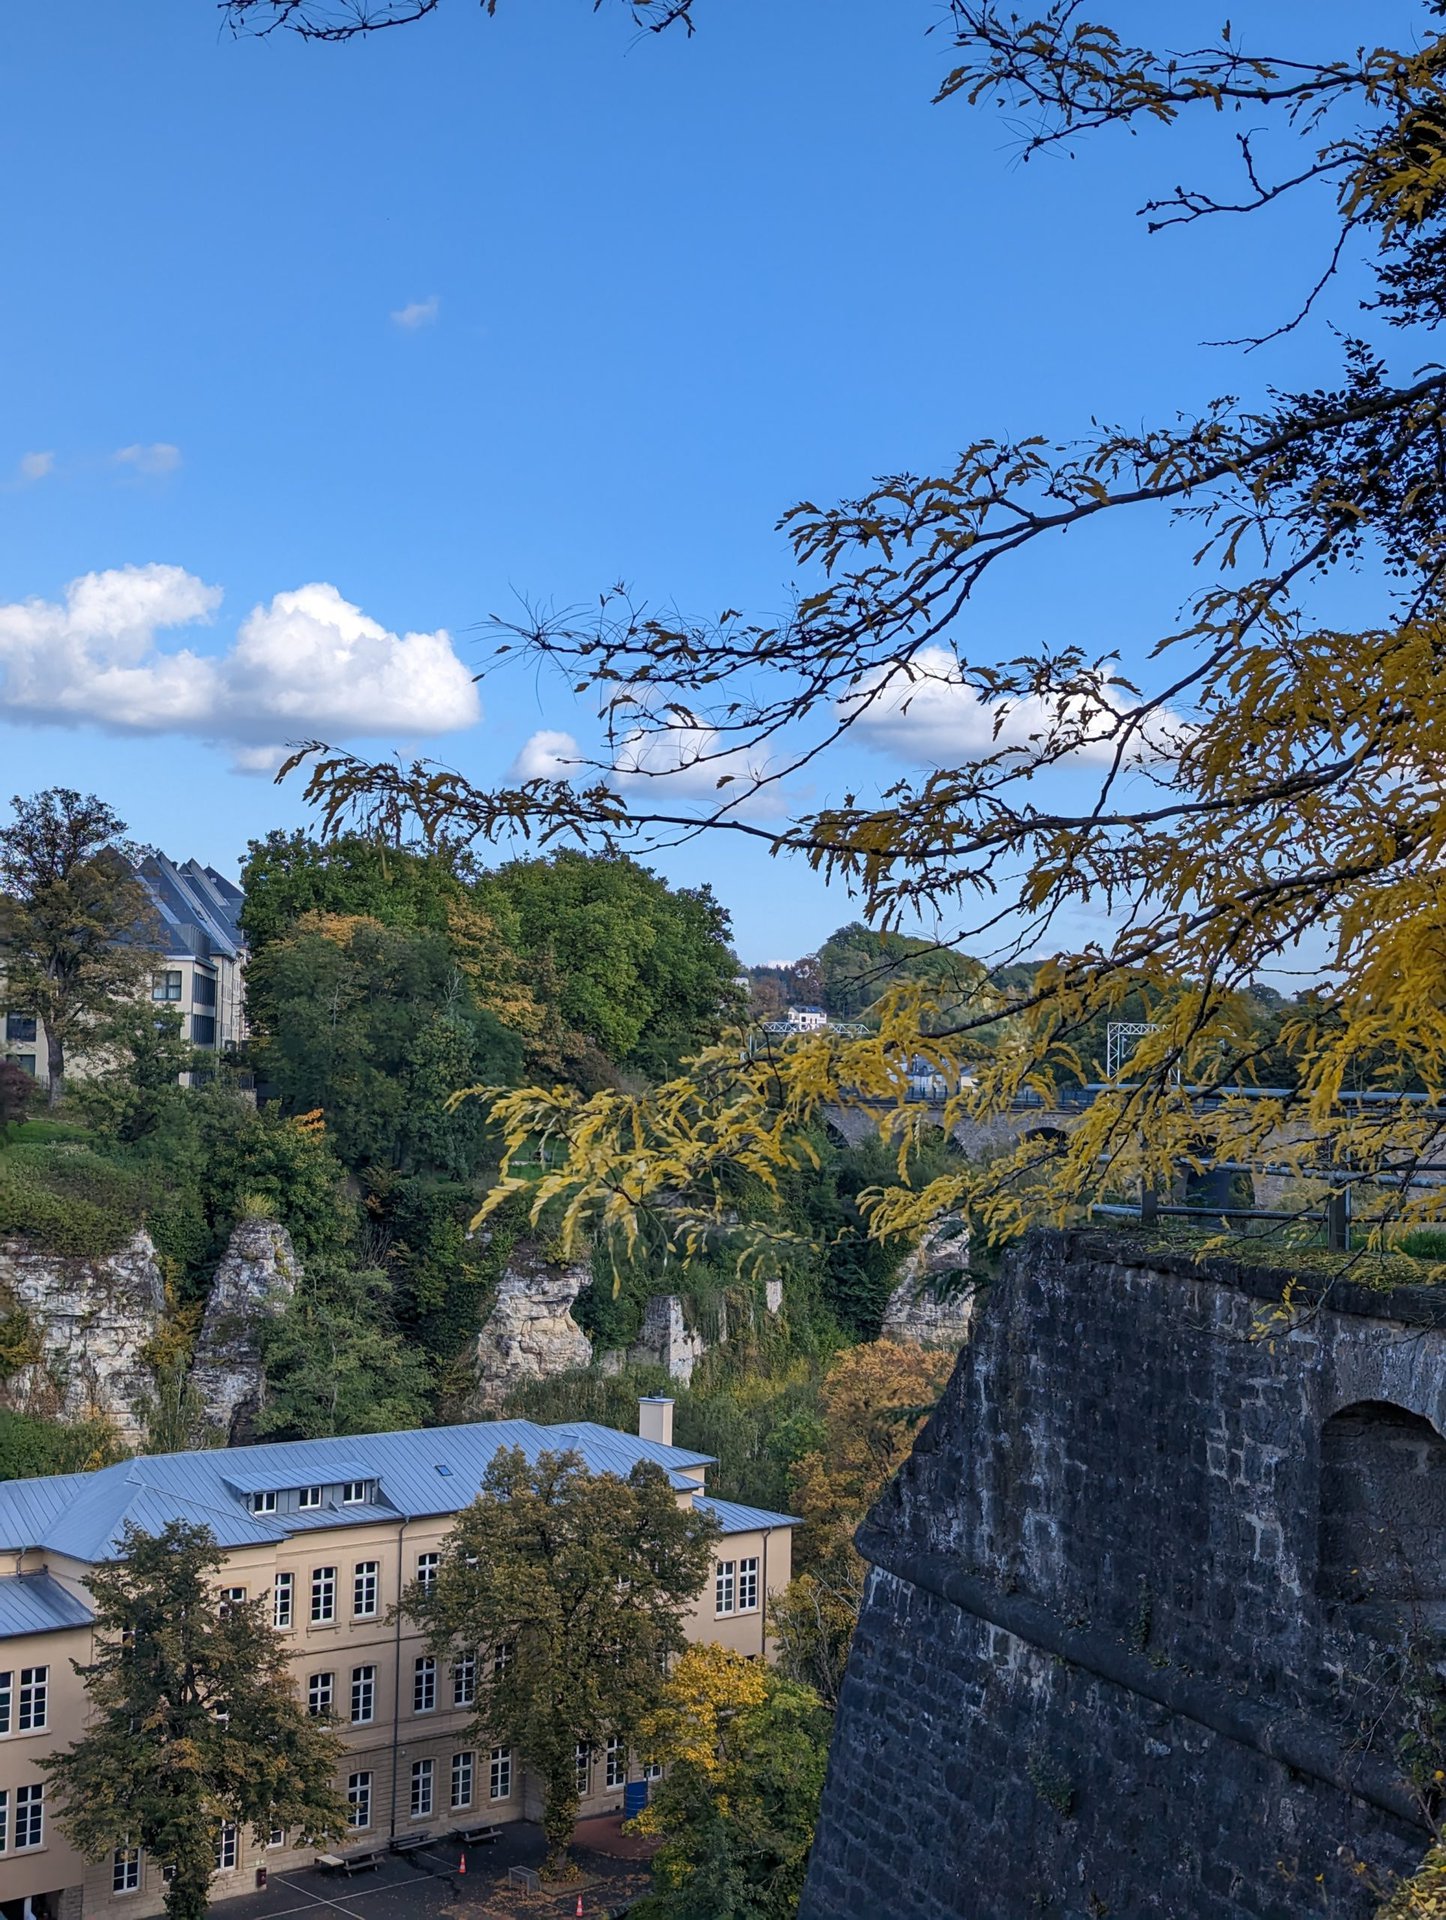 Google Pixel 7 Pro camera samples luxembourg 33